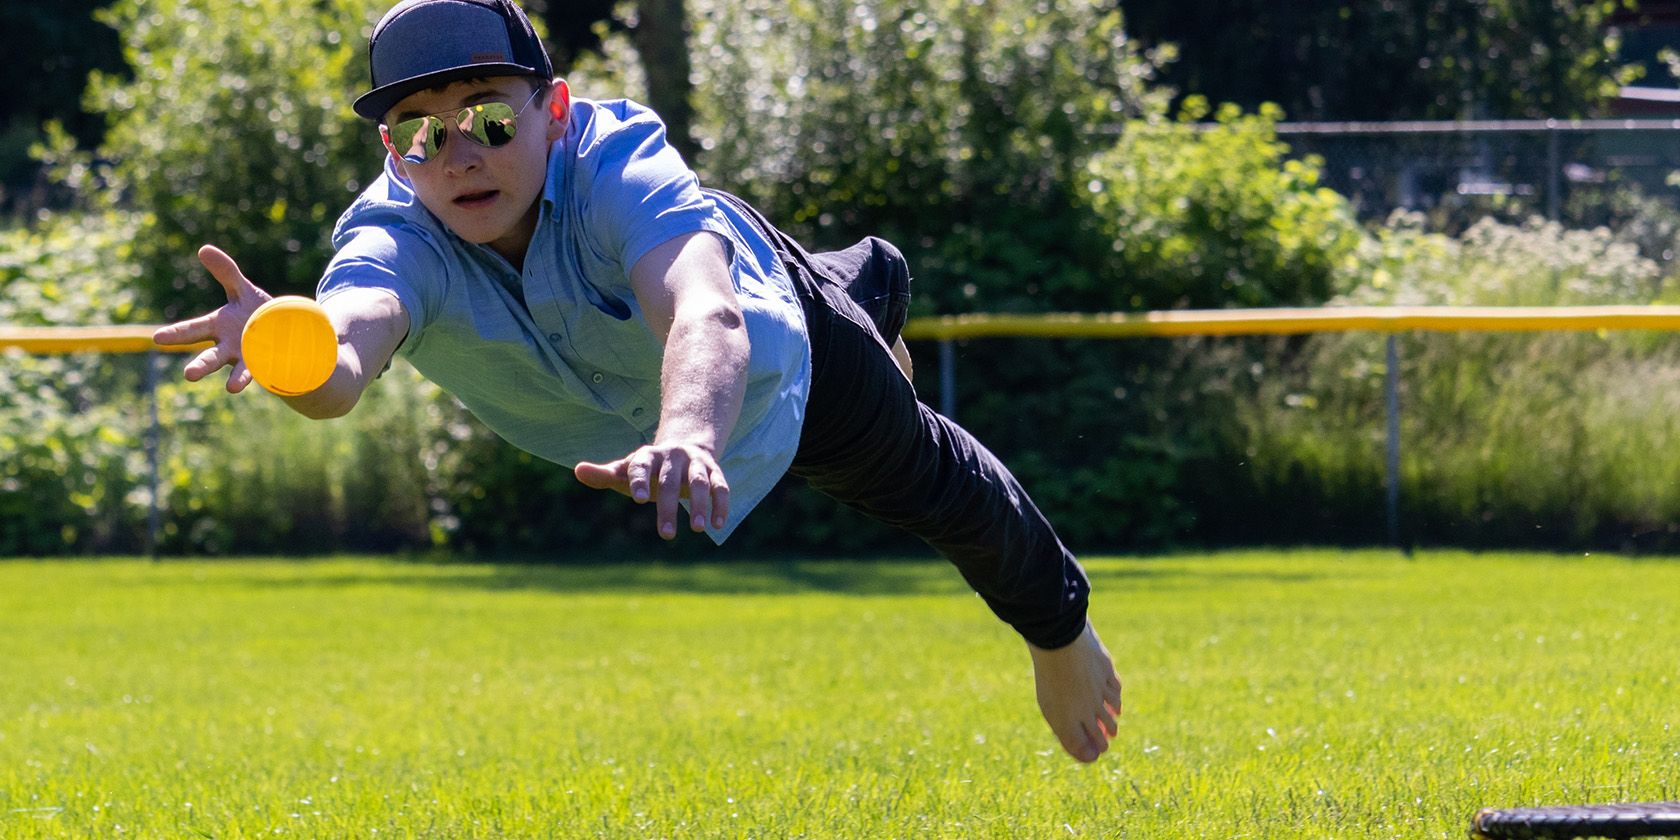 Person diving during a Spikeball game